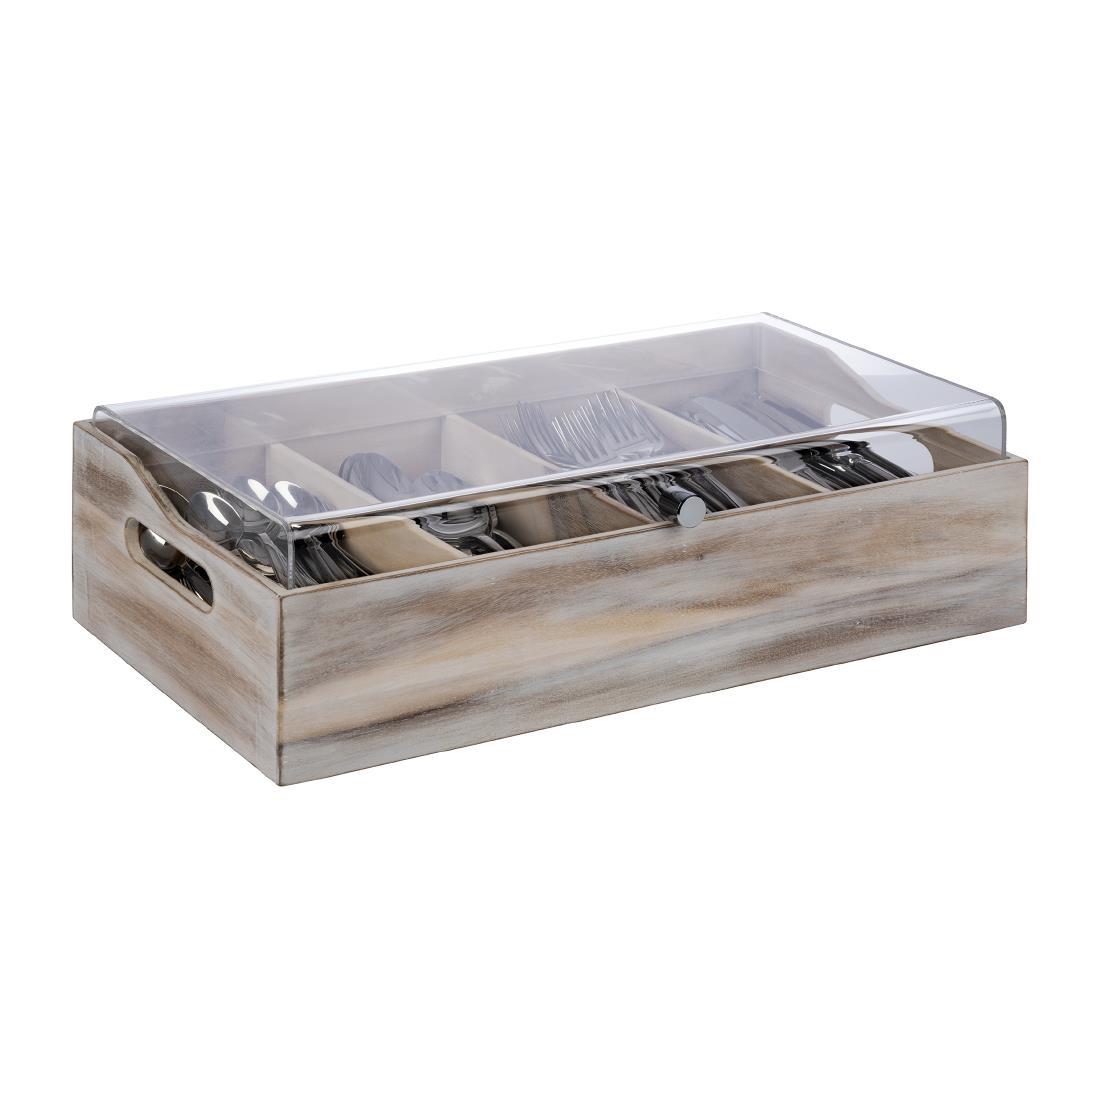 APS Cutlery Tray With Cover 510 x 280mm - FT157  - 3